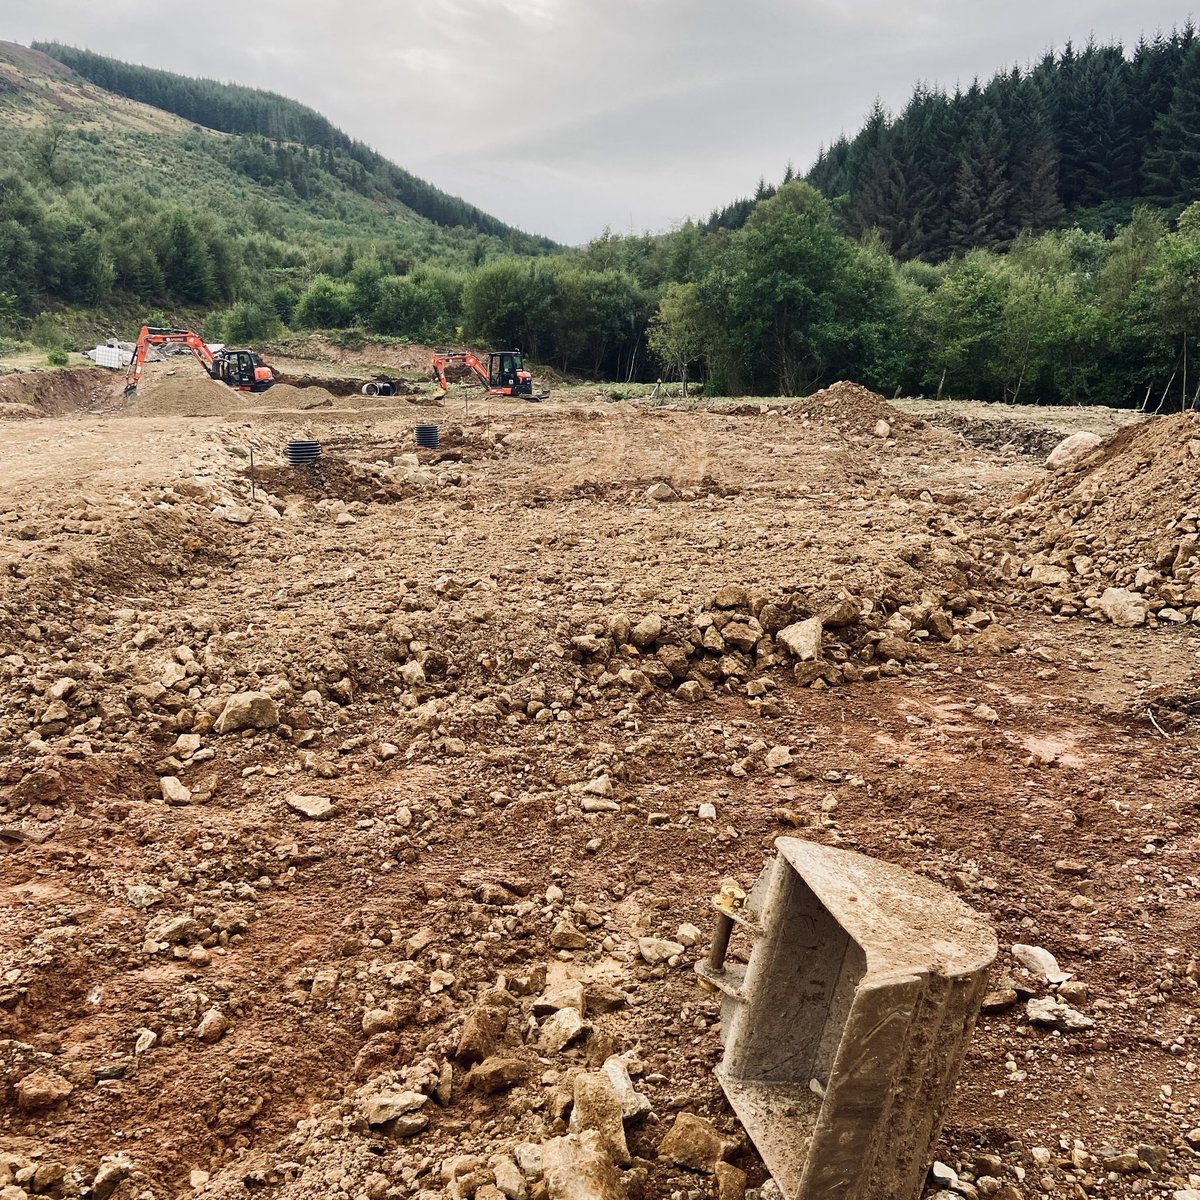 Velosolutions breaking ground on Arran. This floodlit, asphalt pump track is going to be the focal point of our cycling facility. Hoping to be finished and fully open by the end of 2023.